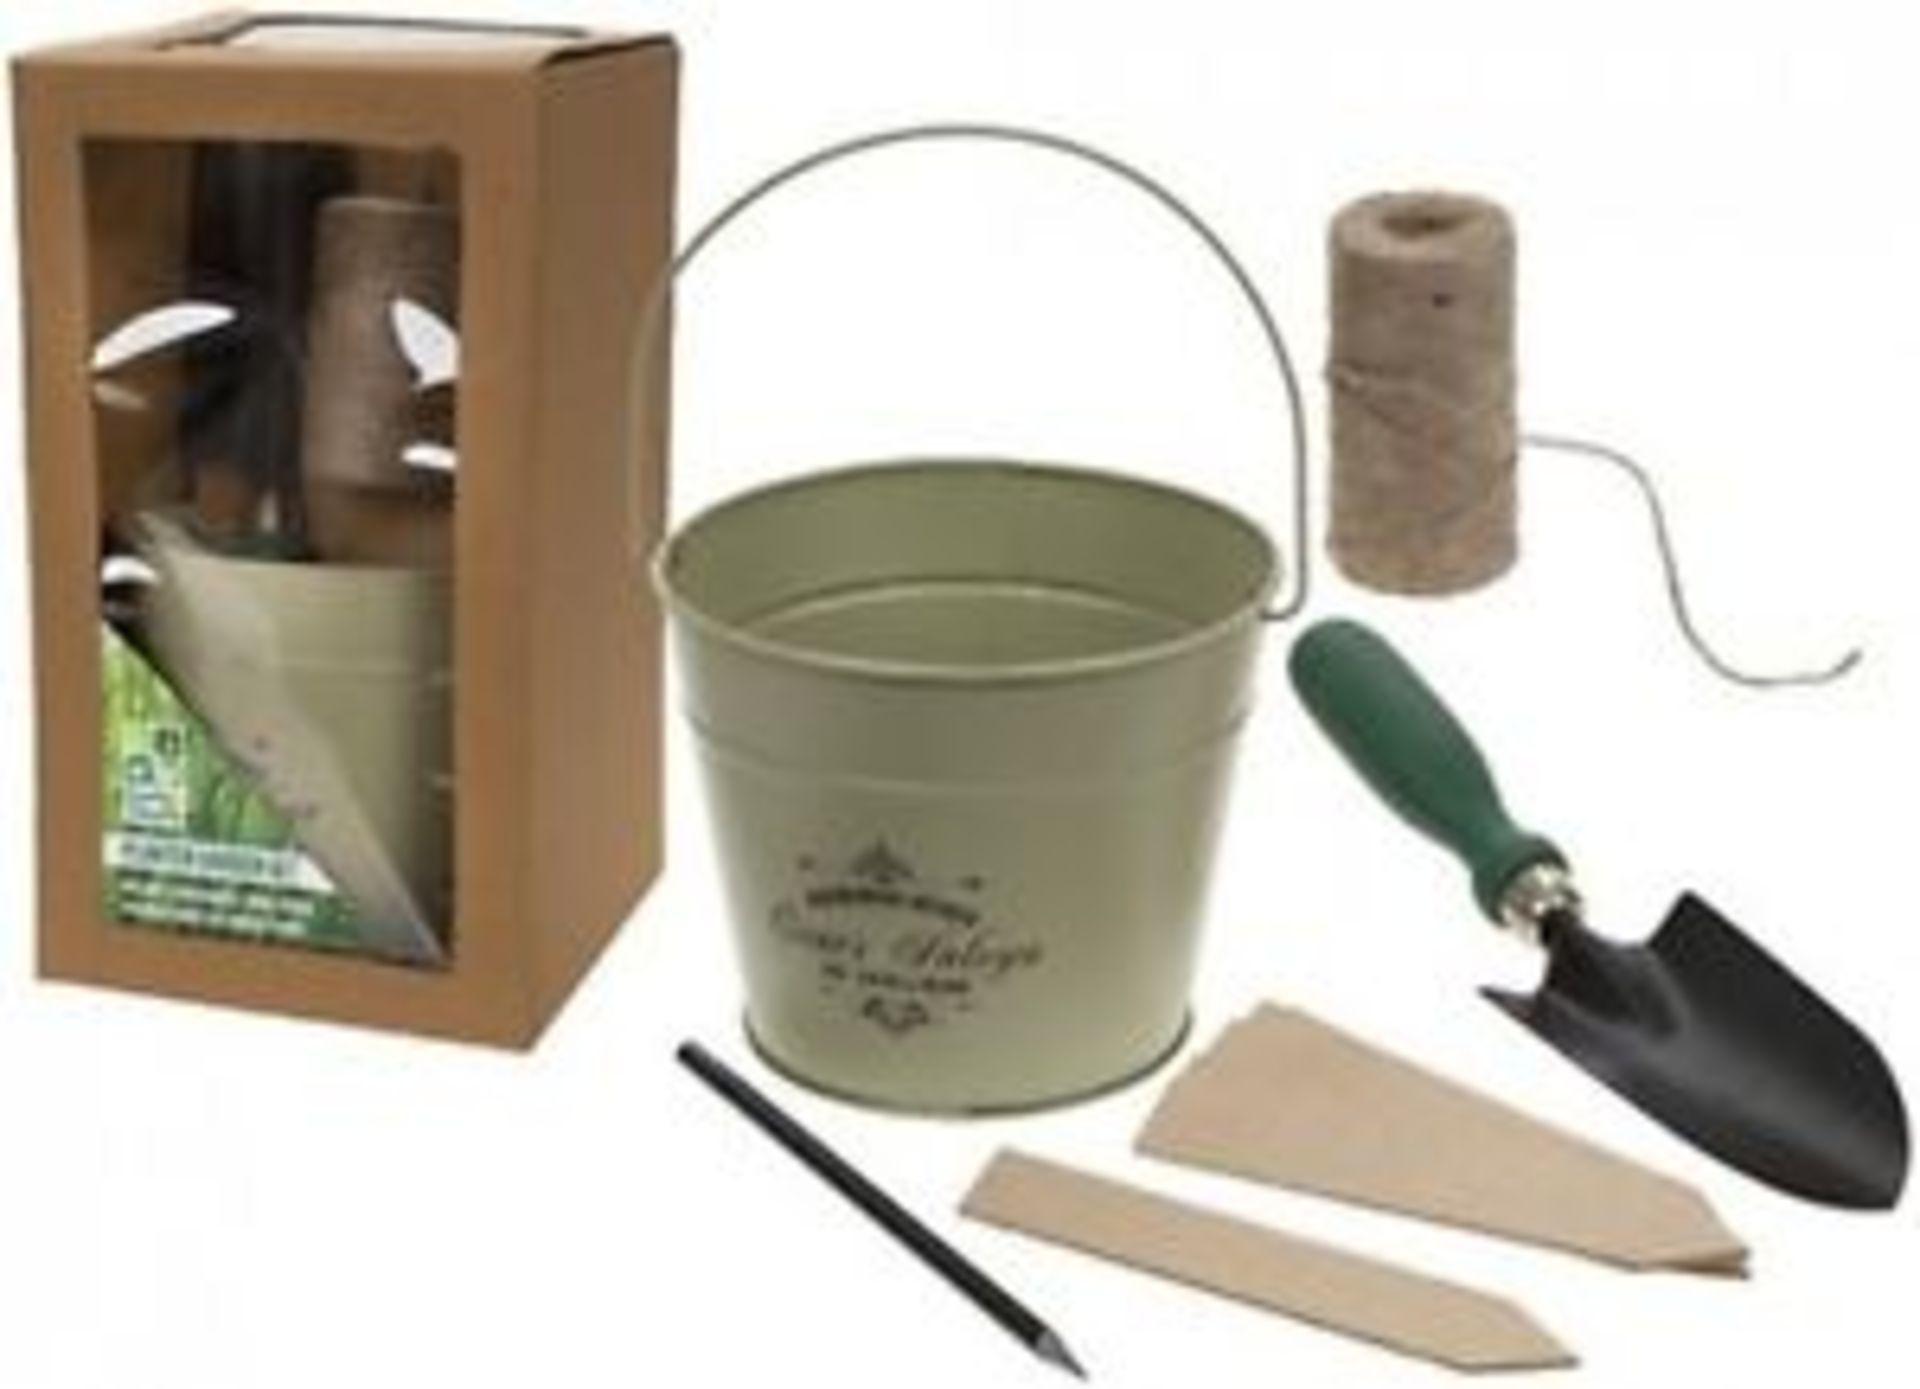 V *TRADE QTY* Brand New Garden Planter Set Includes Metal Plant Pot - Twine - Pencil - 6 Wooden